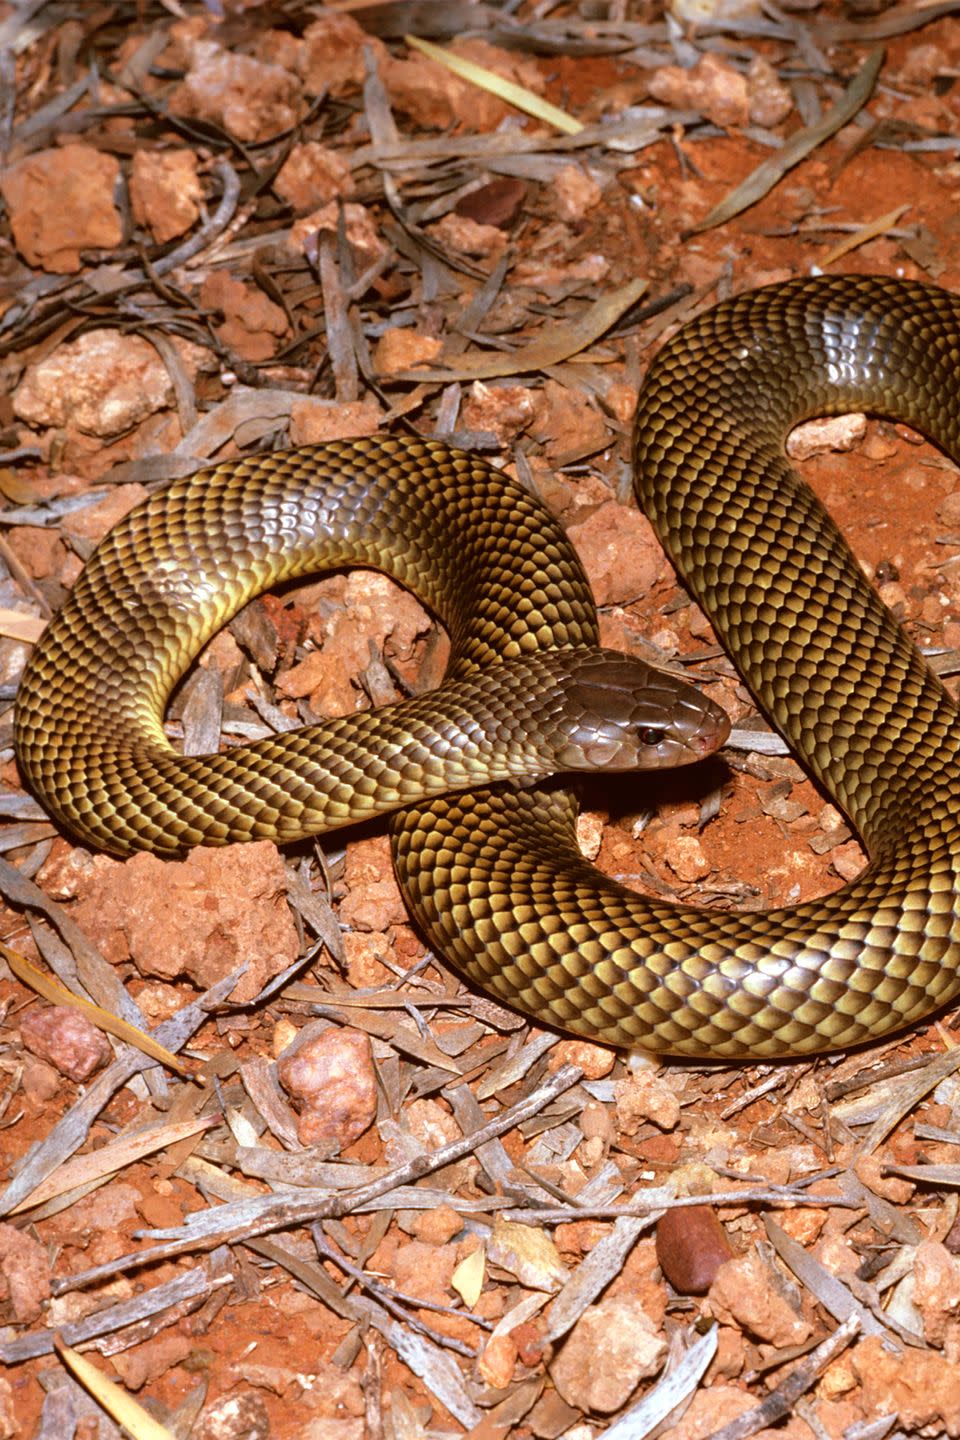 16. King Brown snakes squeeze out the most venom.